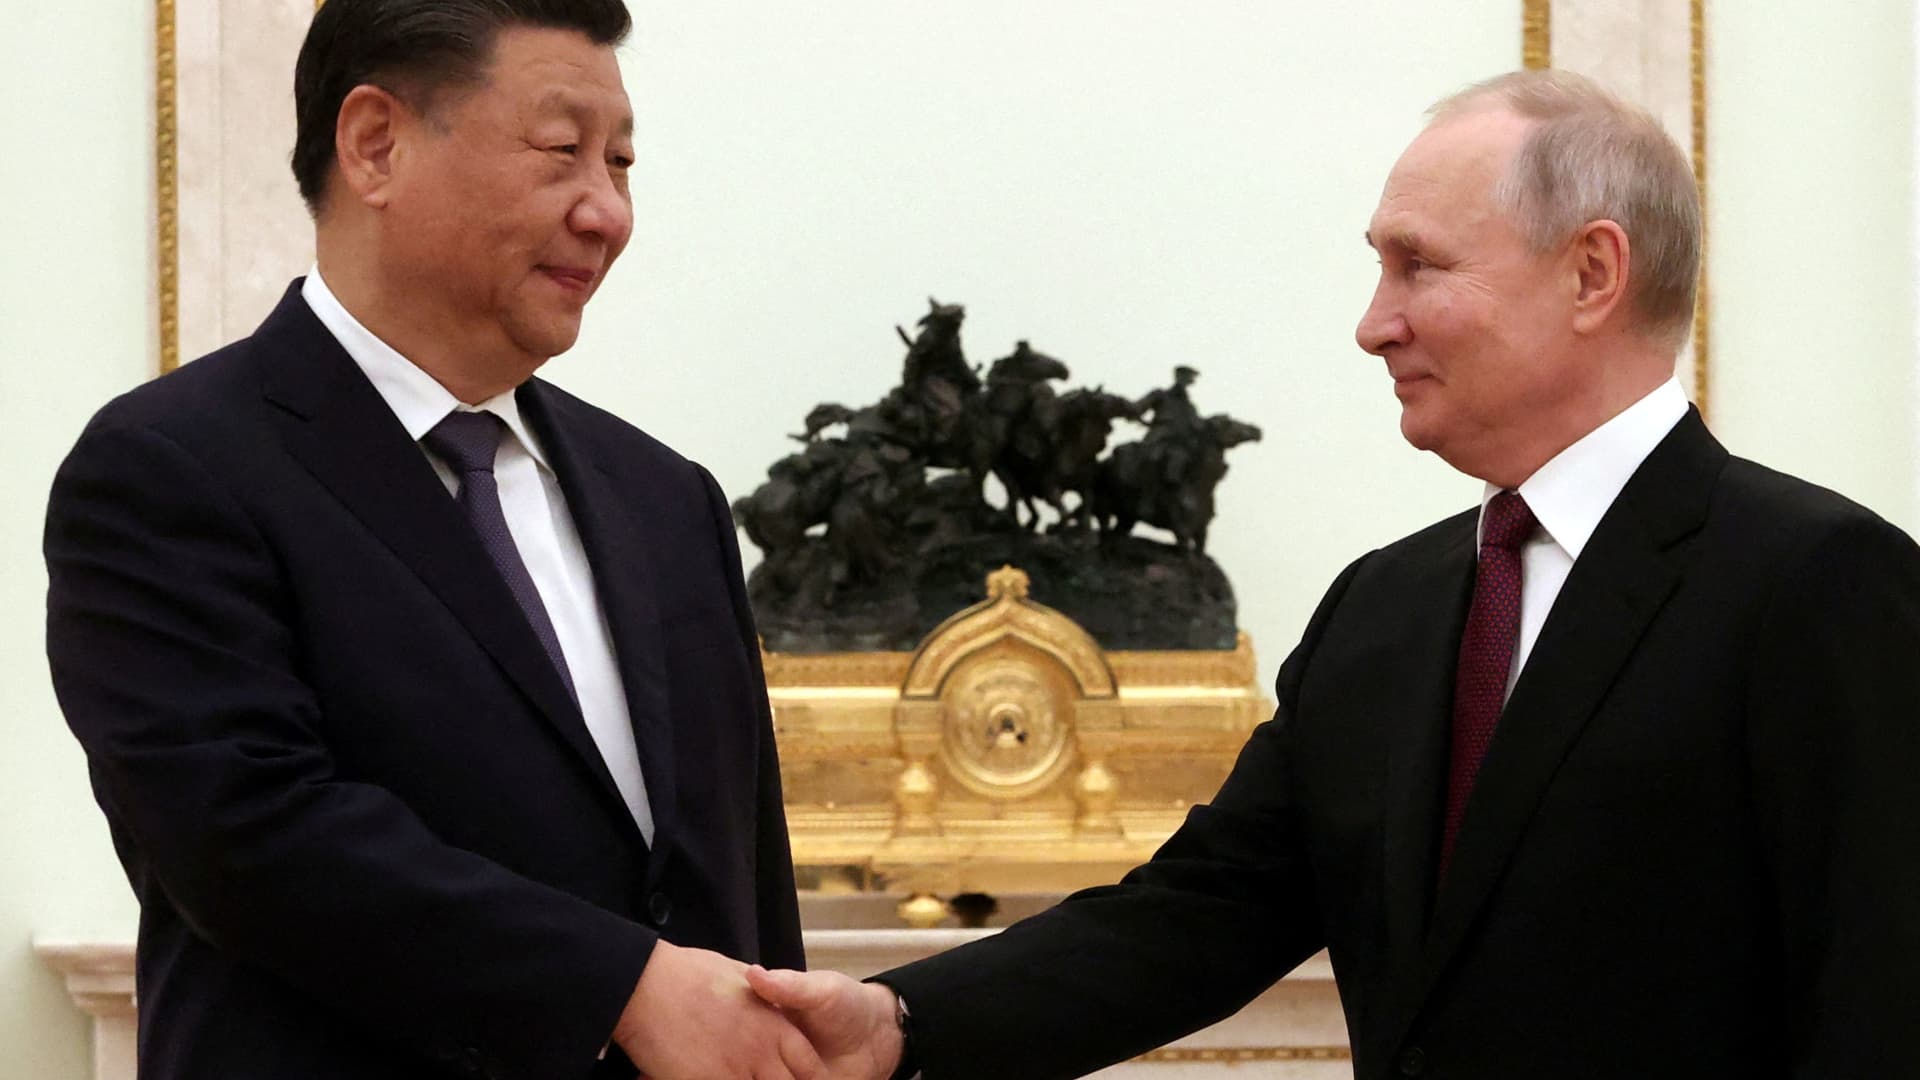 Russian President Vladimir Putin shakes with Chinese counterpart Xi Jinping during a meeting at the Kremlin in Moscow on March 20, 2023. Xi said he's invited Putin to visit China this year, Russian news agencies reported Tuesday.